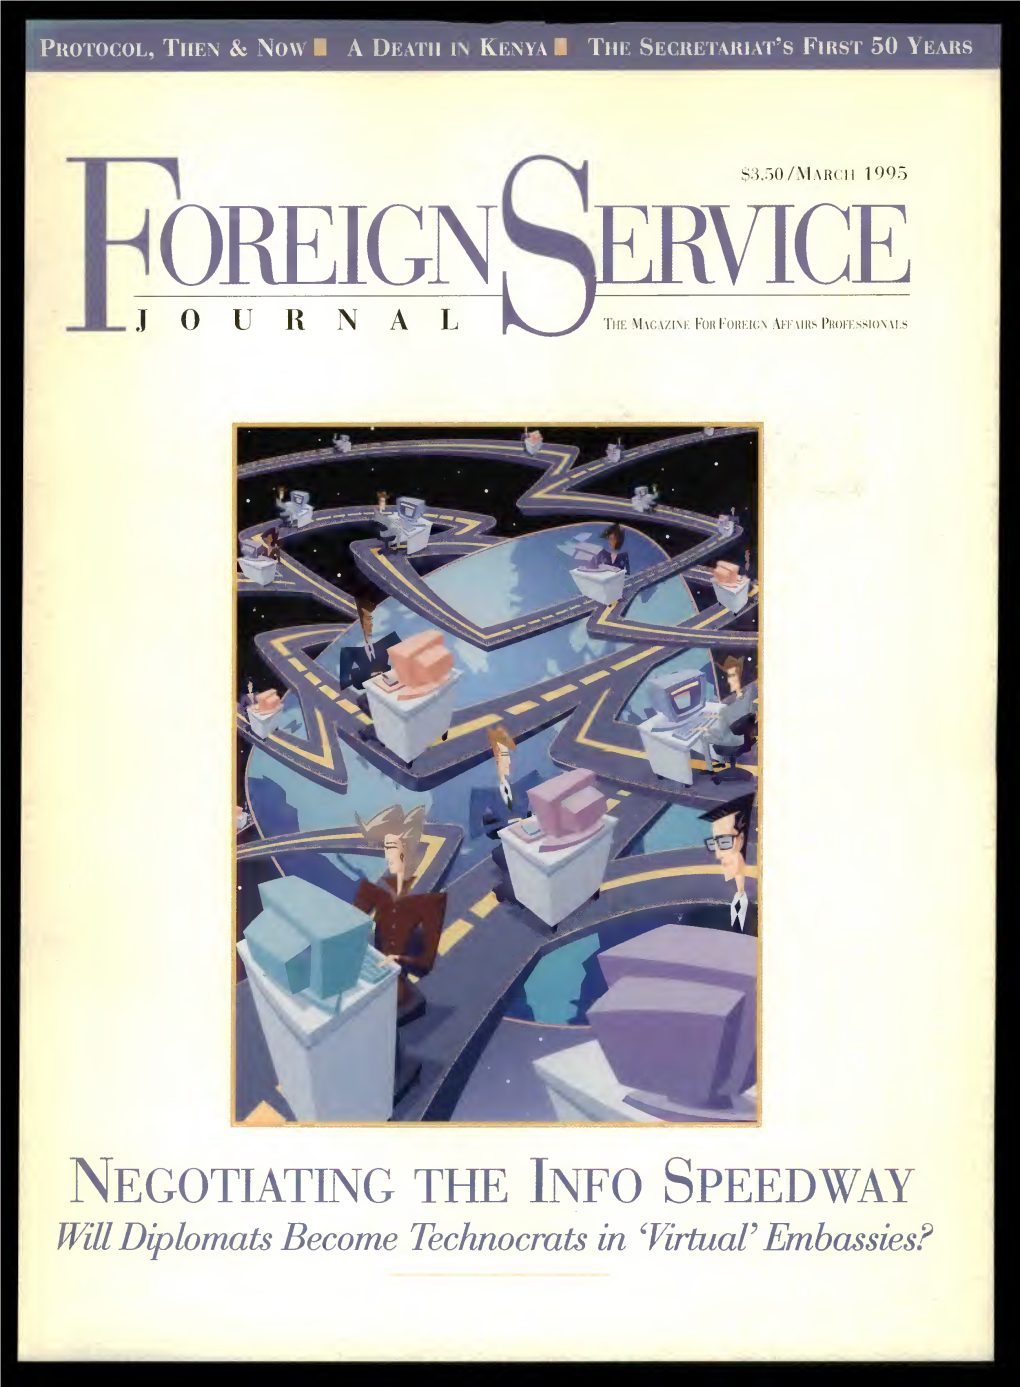 The Foreign Service Journal, March 1995